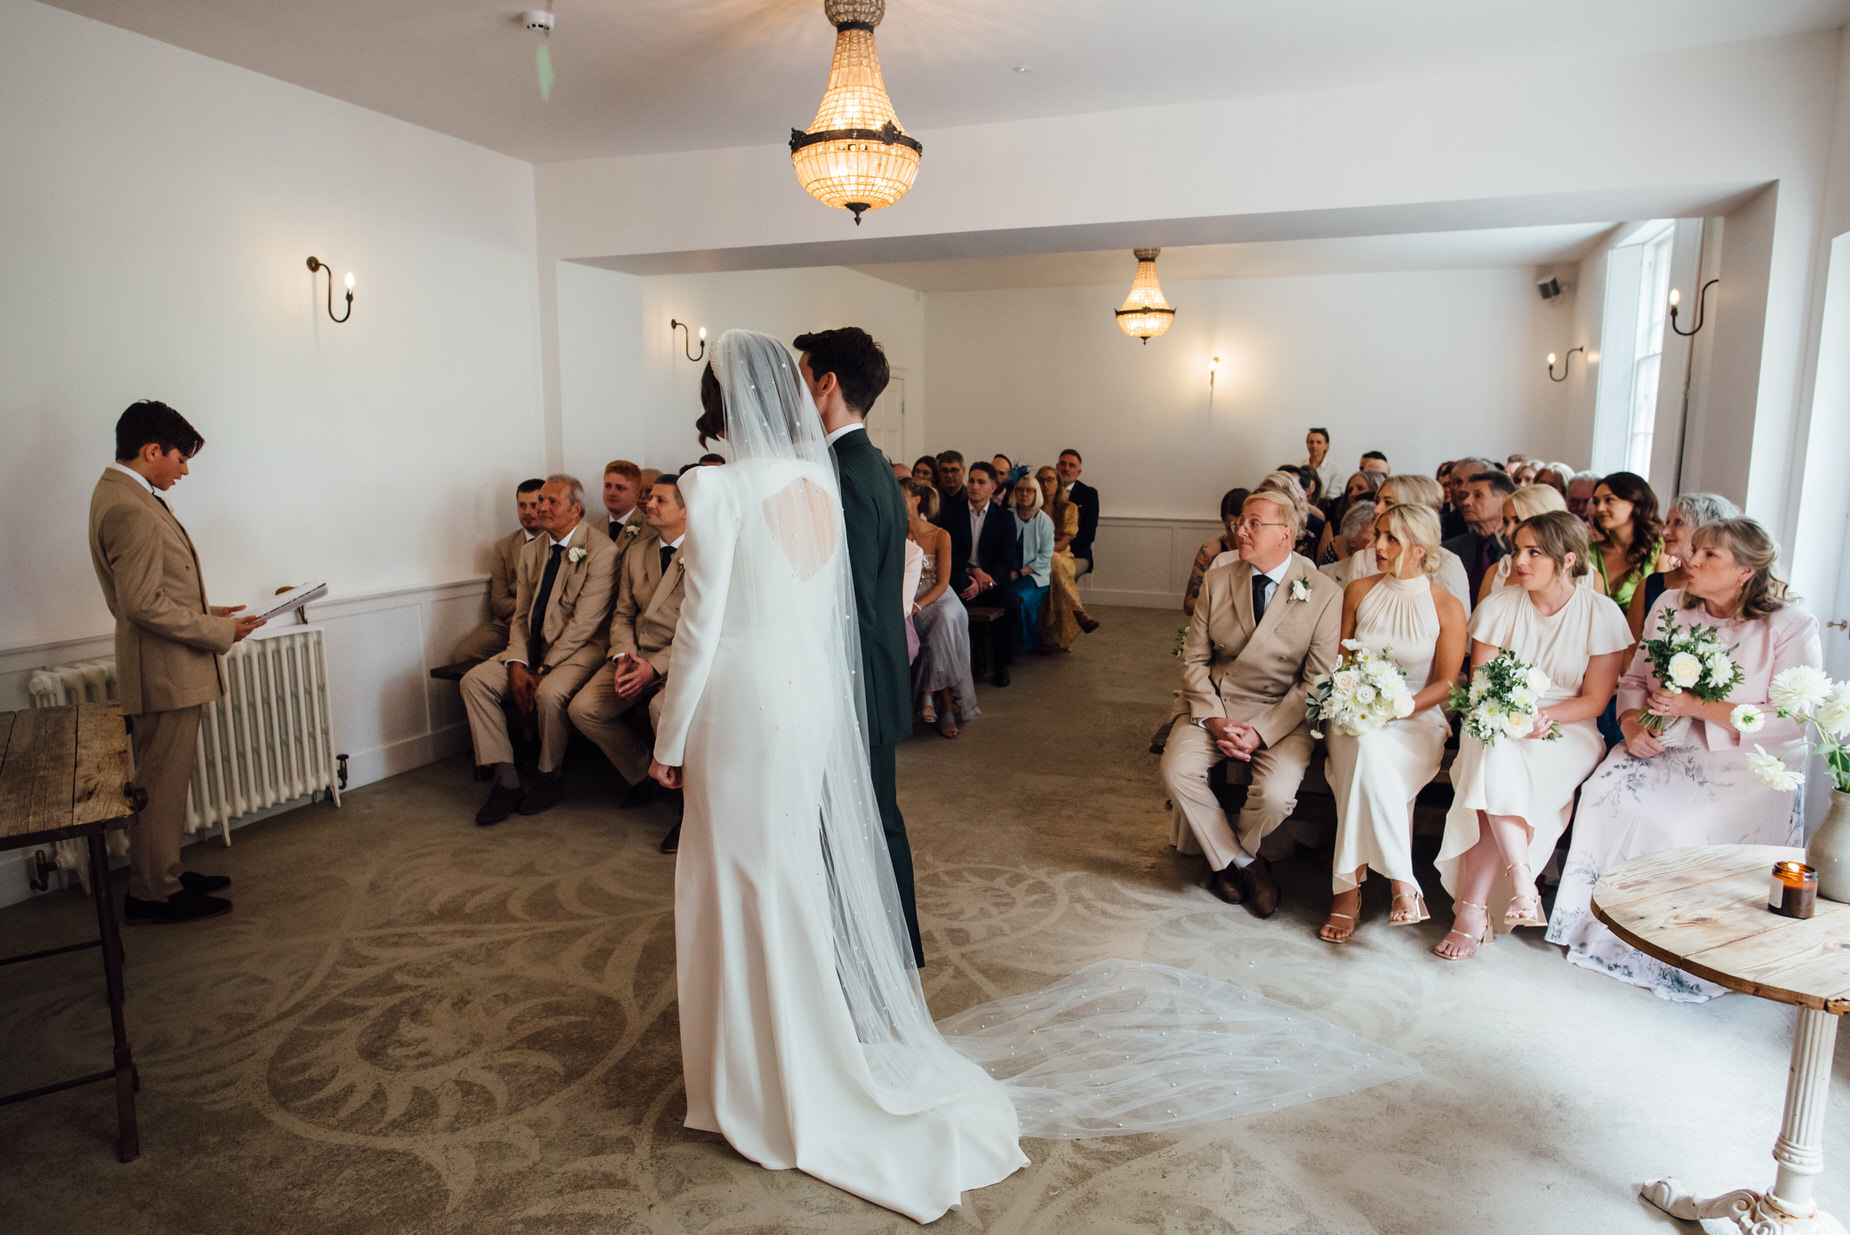 authentic wedding photography, Aswarby Rectory Wedding, michelle wood photographer